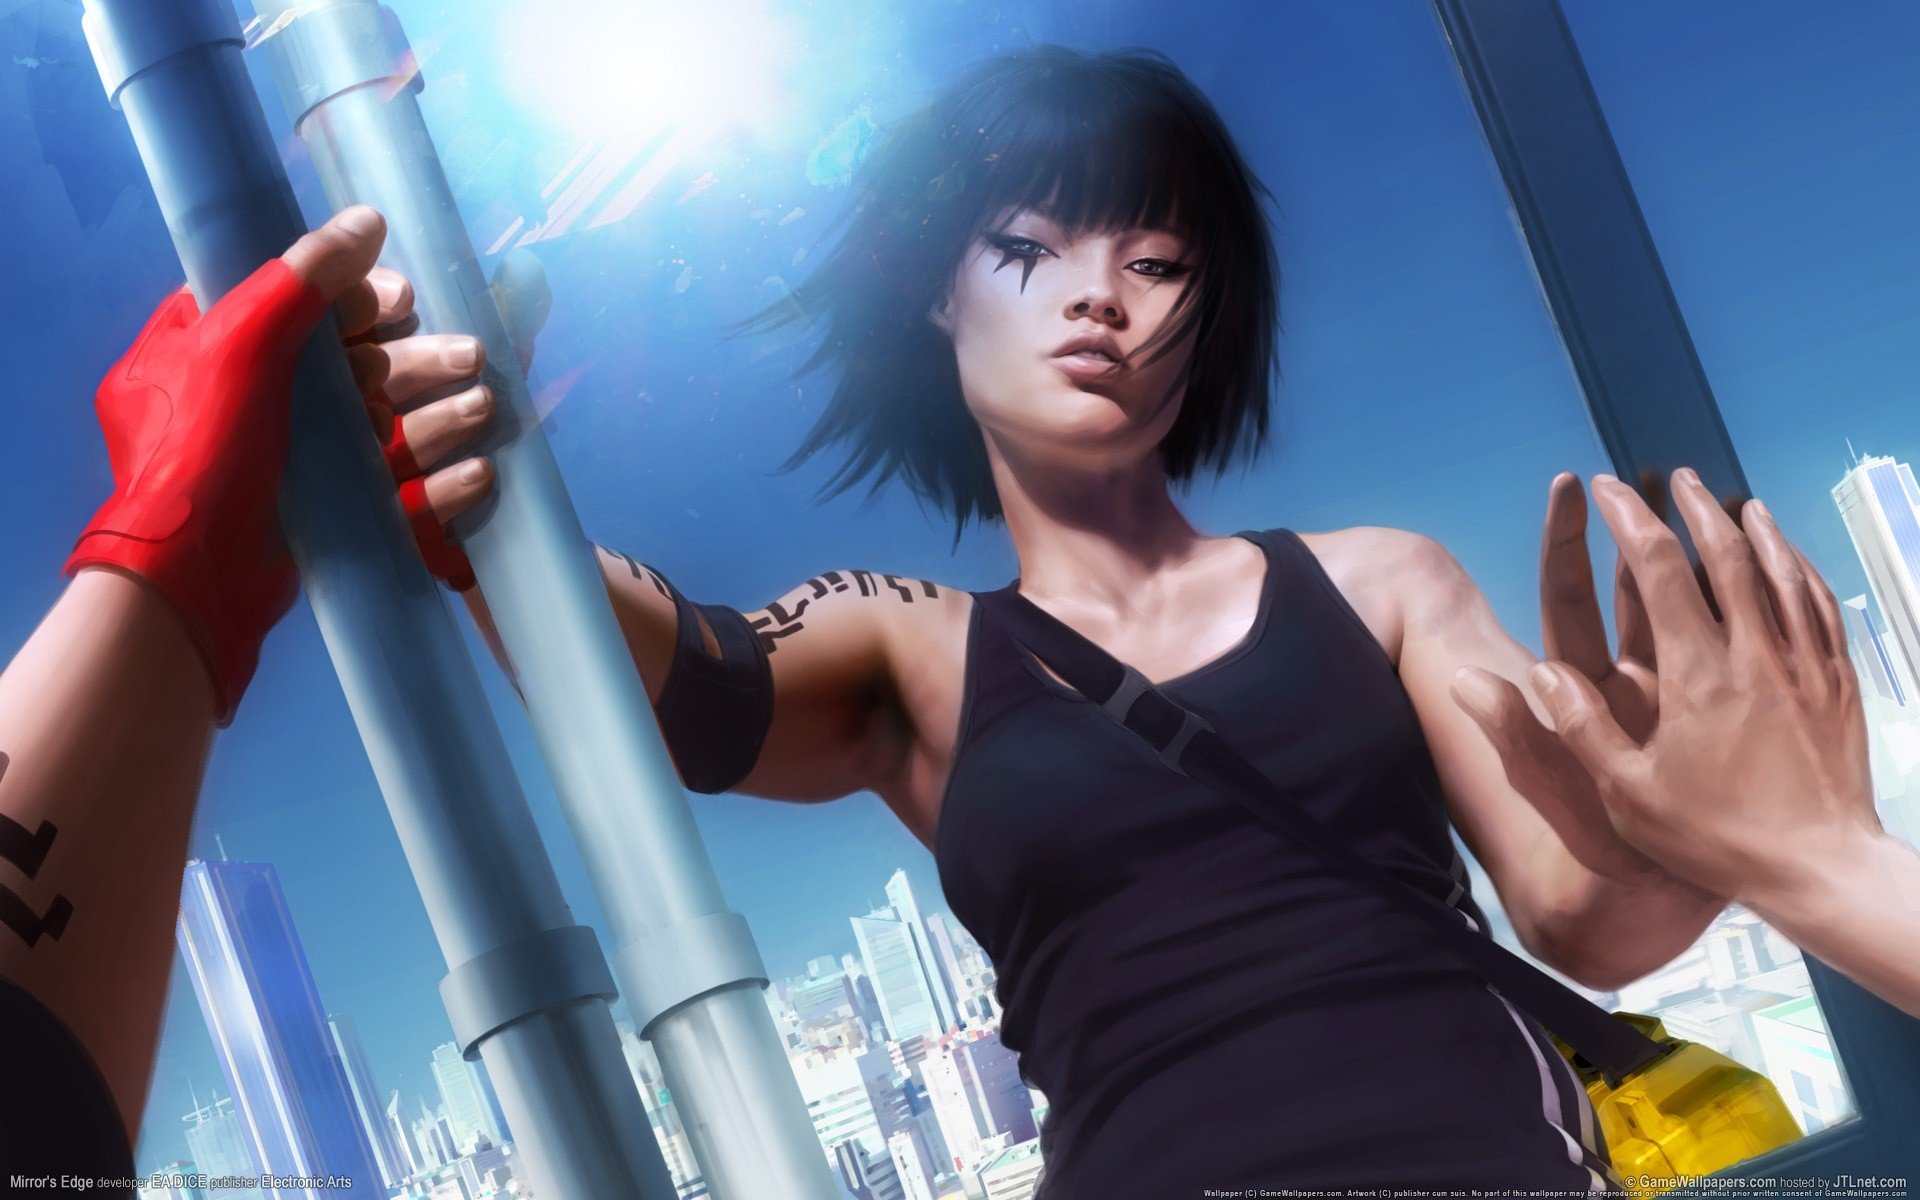 Mirrors Edge, Faith Connors, Reflection, Red Wallpaper